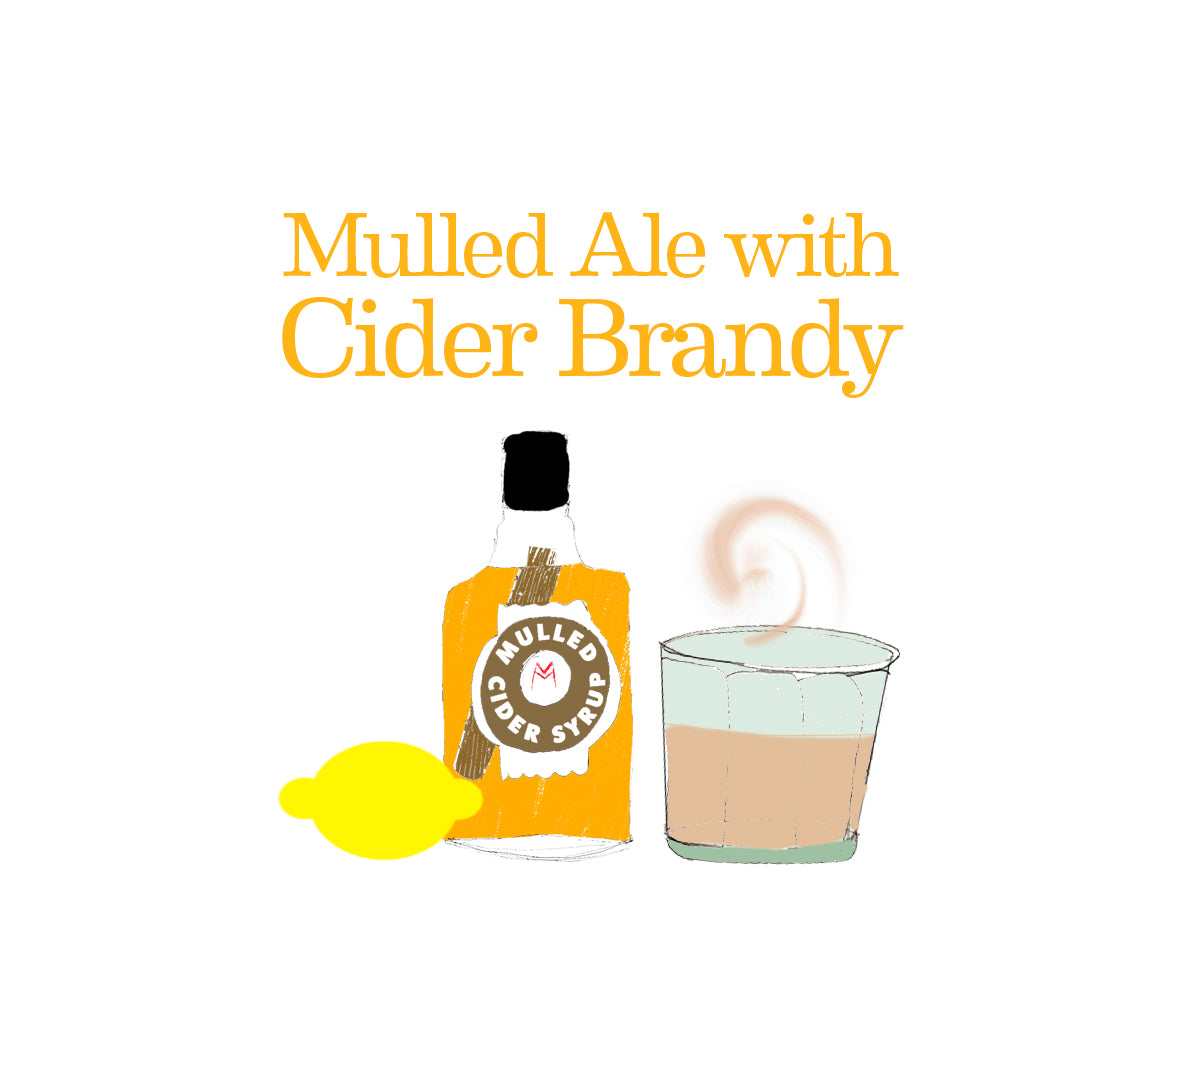 Mulled Ale with Cider Brandy